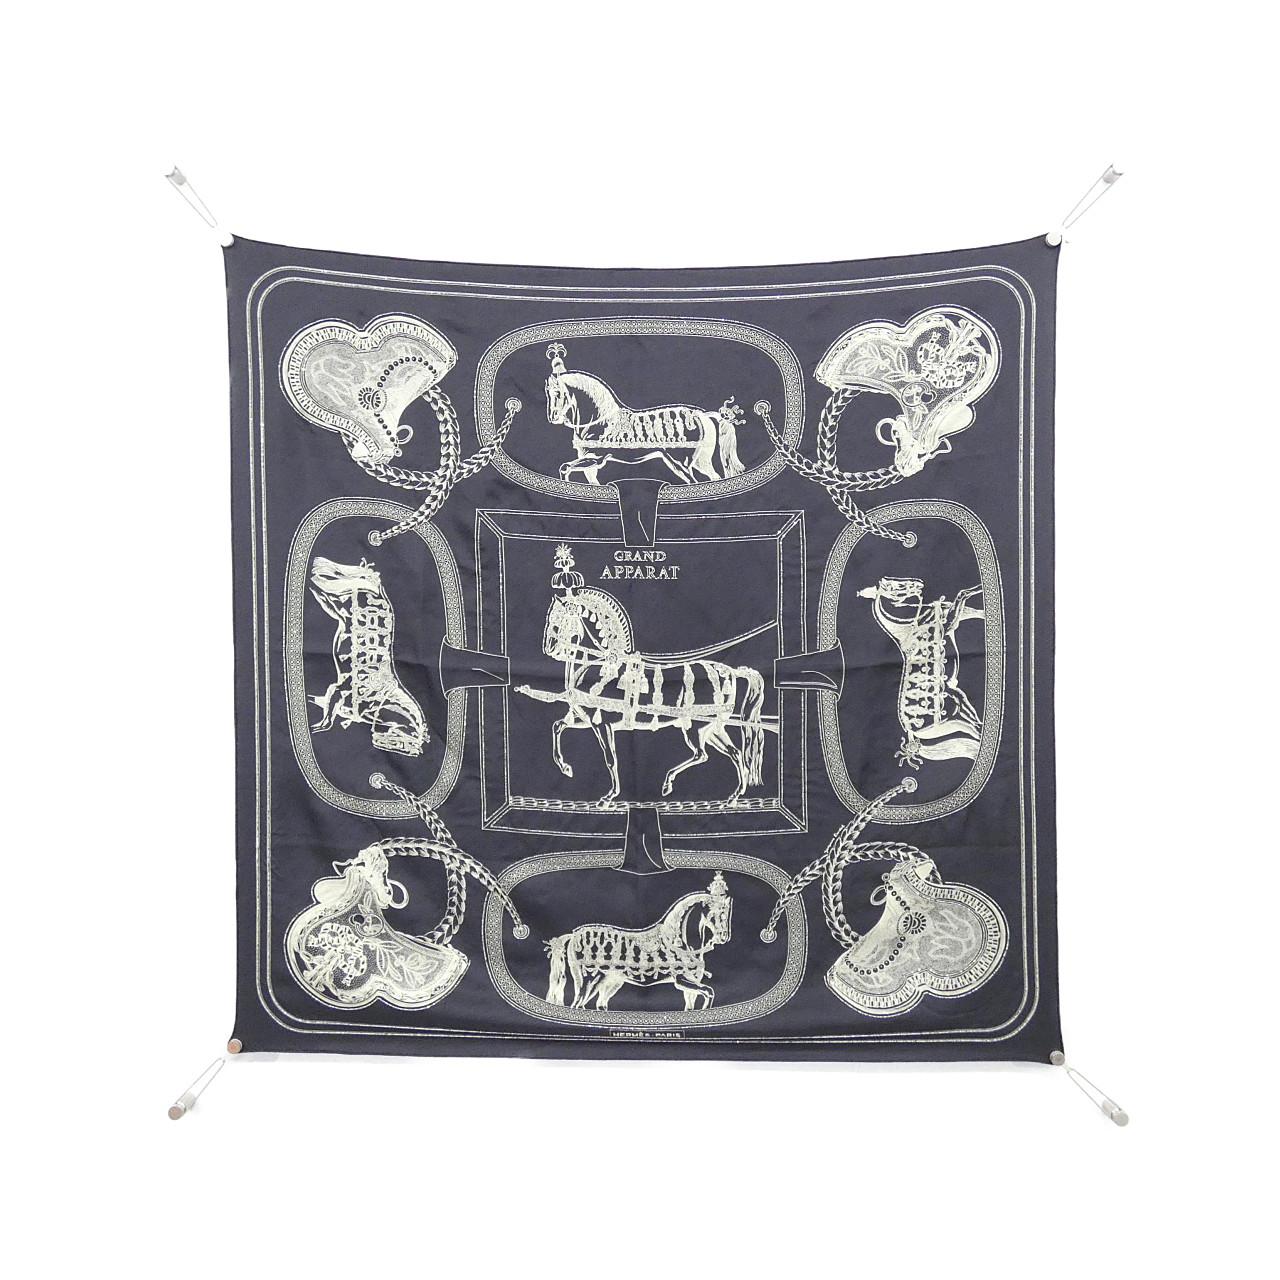 HERMES GRAND APPARAT Carre Embroidery 90cm 591364S Scarf